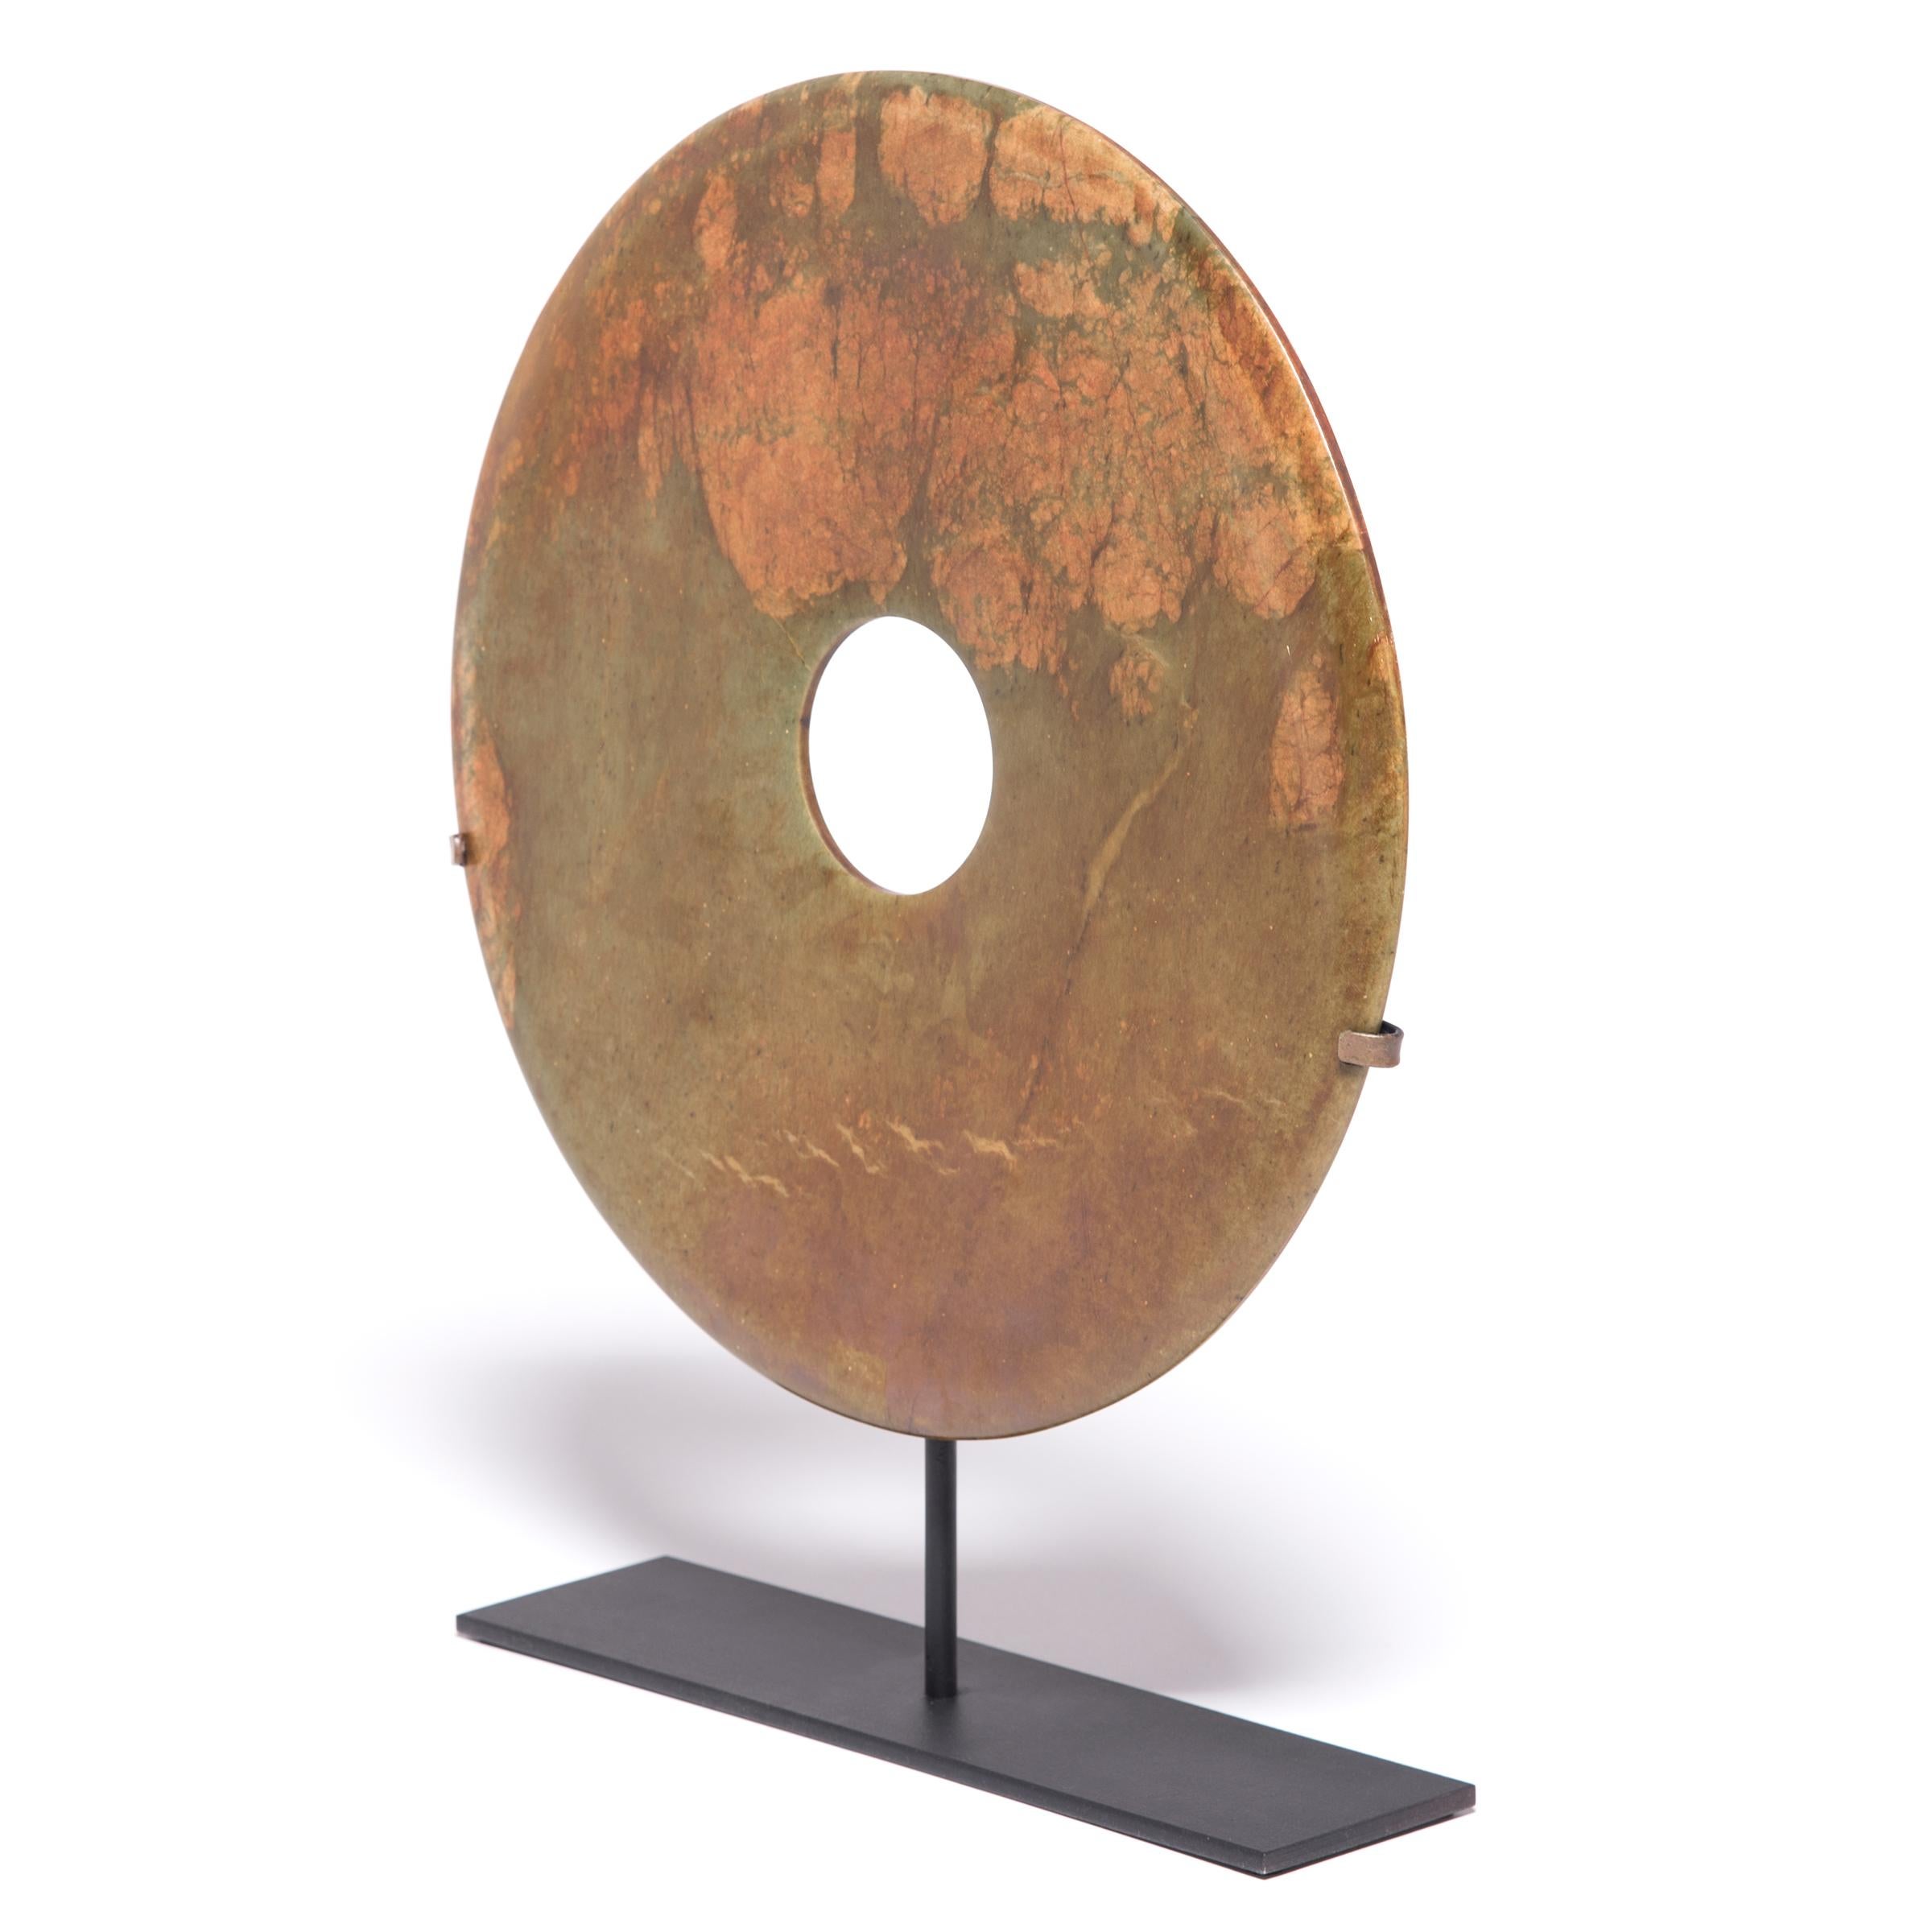 Found in the tombs of ancient Chinese emperors and aristocrats, bi discs such as this have a mysterious and spiritual history, and their function and significance remain unknown. Shaping this hard stone takes considerable skill. An artisan imbues